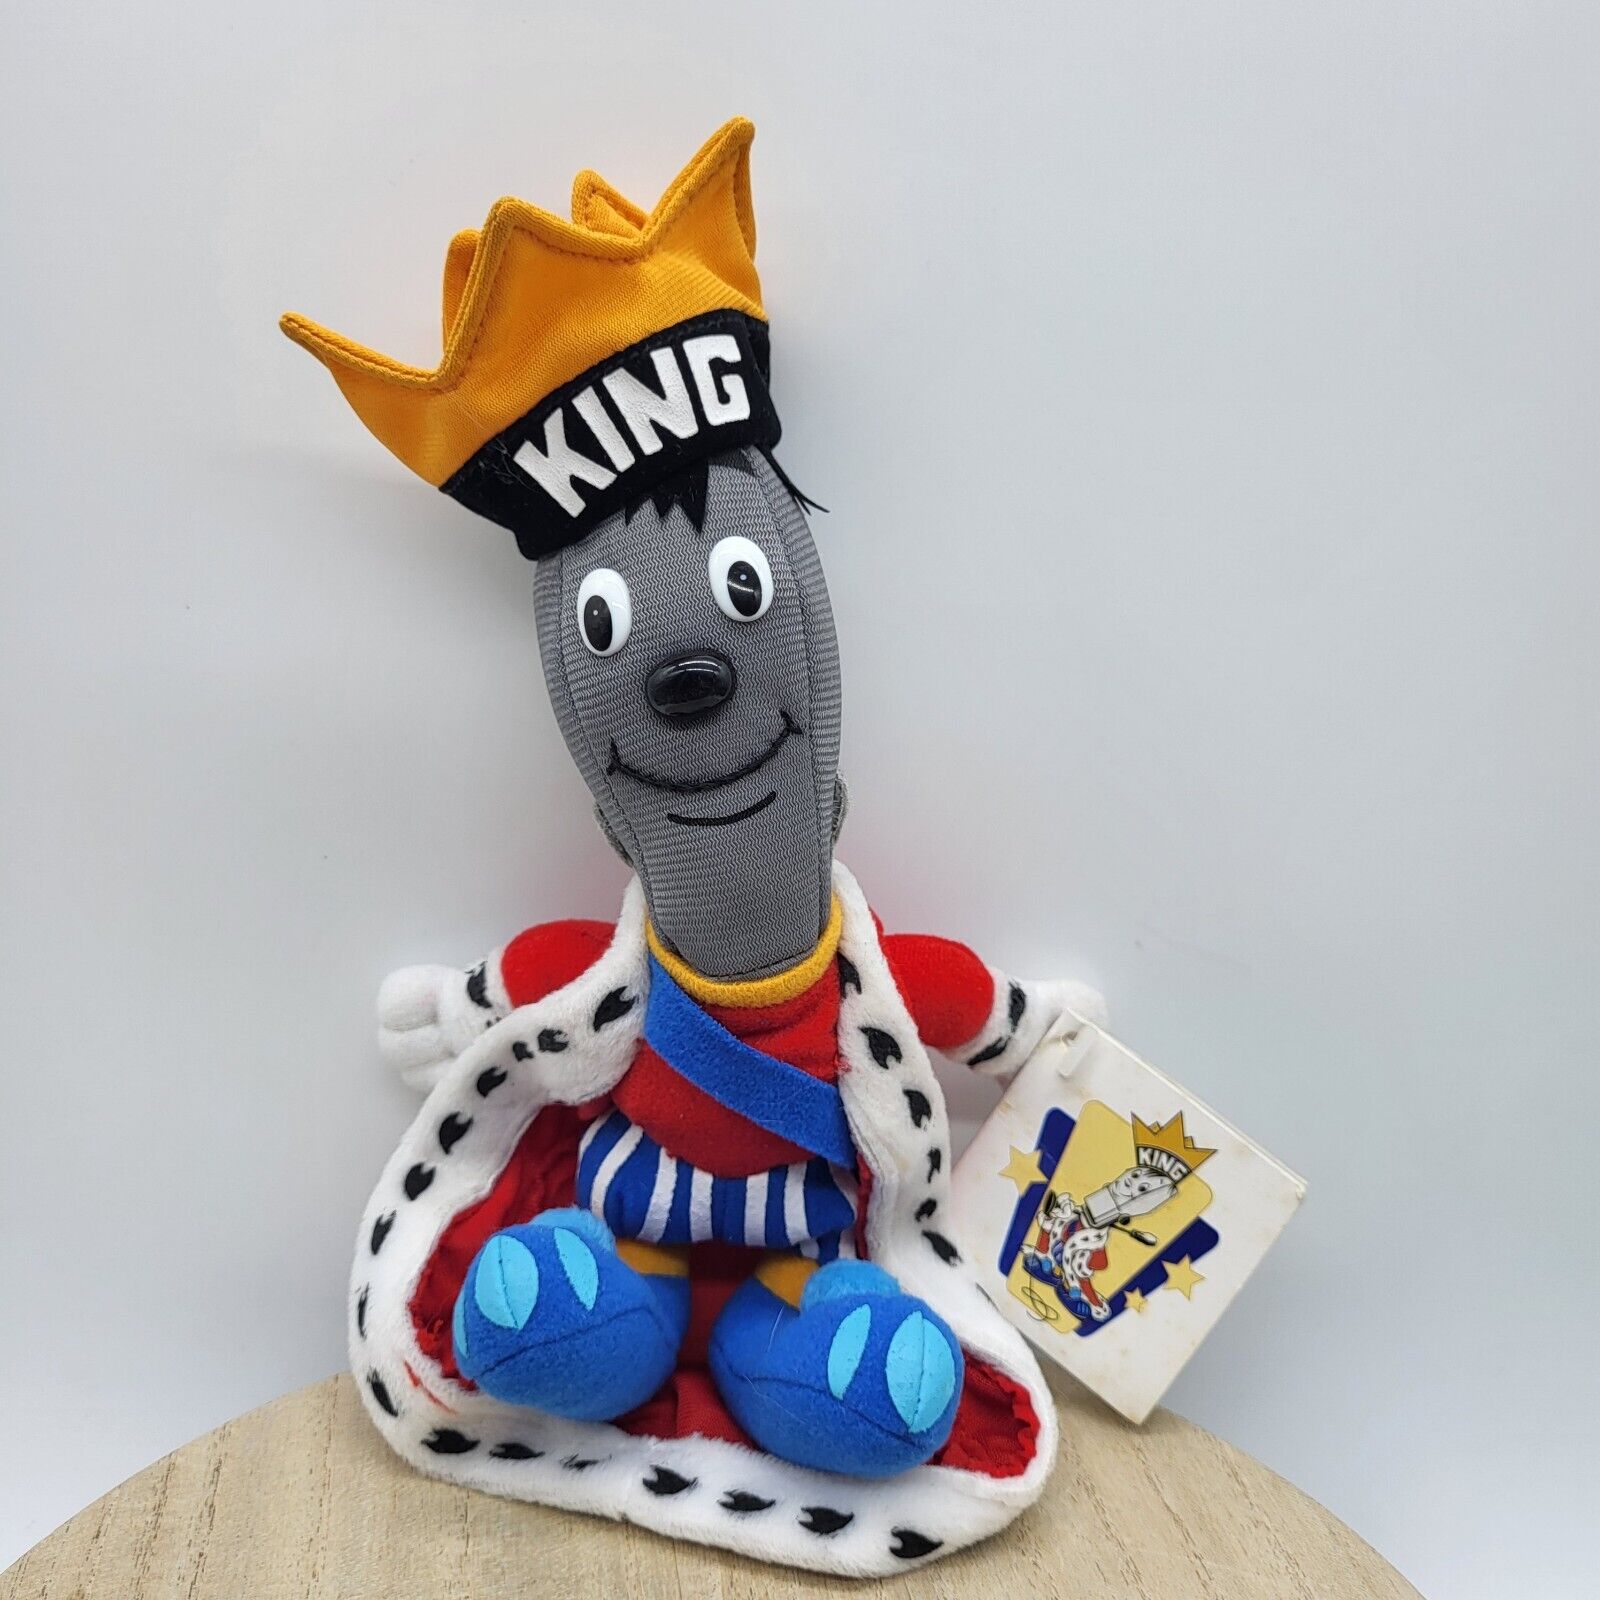 KING 5 Seattle 50th Anniversary King Mike Microphone Plush Doll (with tags) 1998